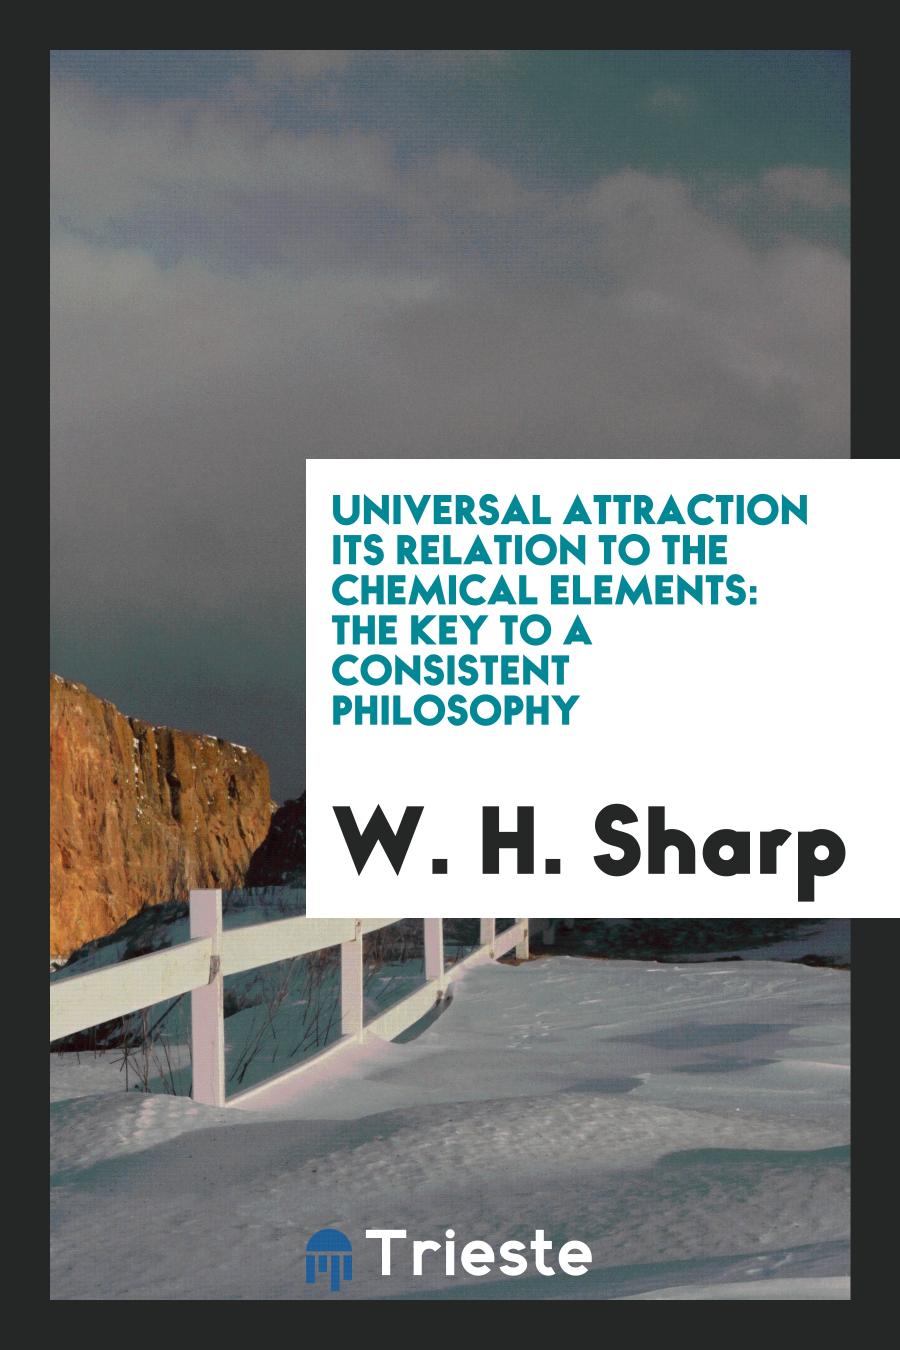 Universal Attraction Its Relation to the Chemical Elements: The Key to a Consistent Philosophy